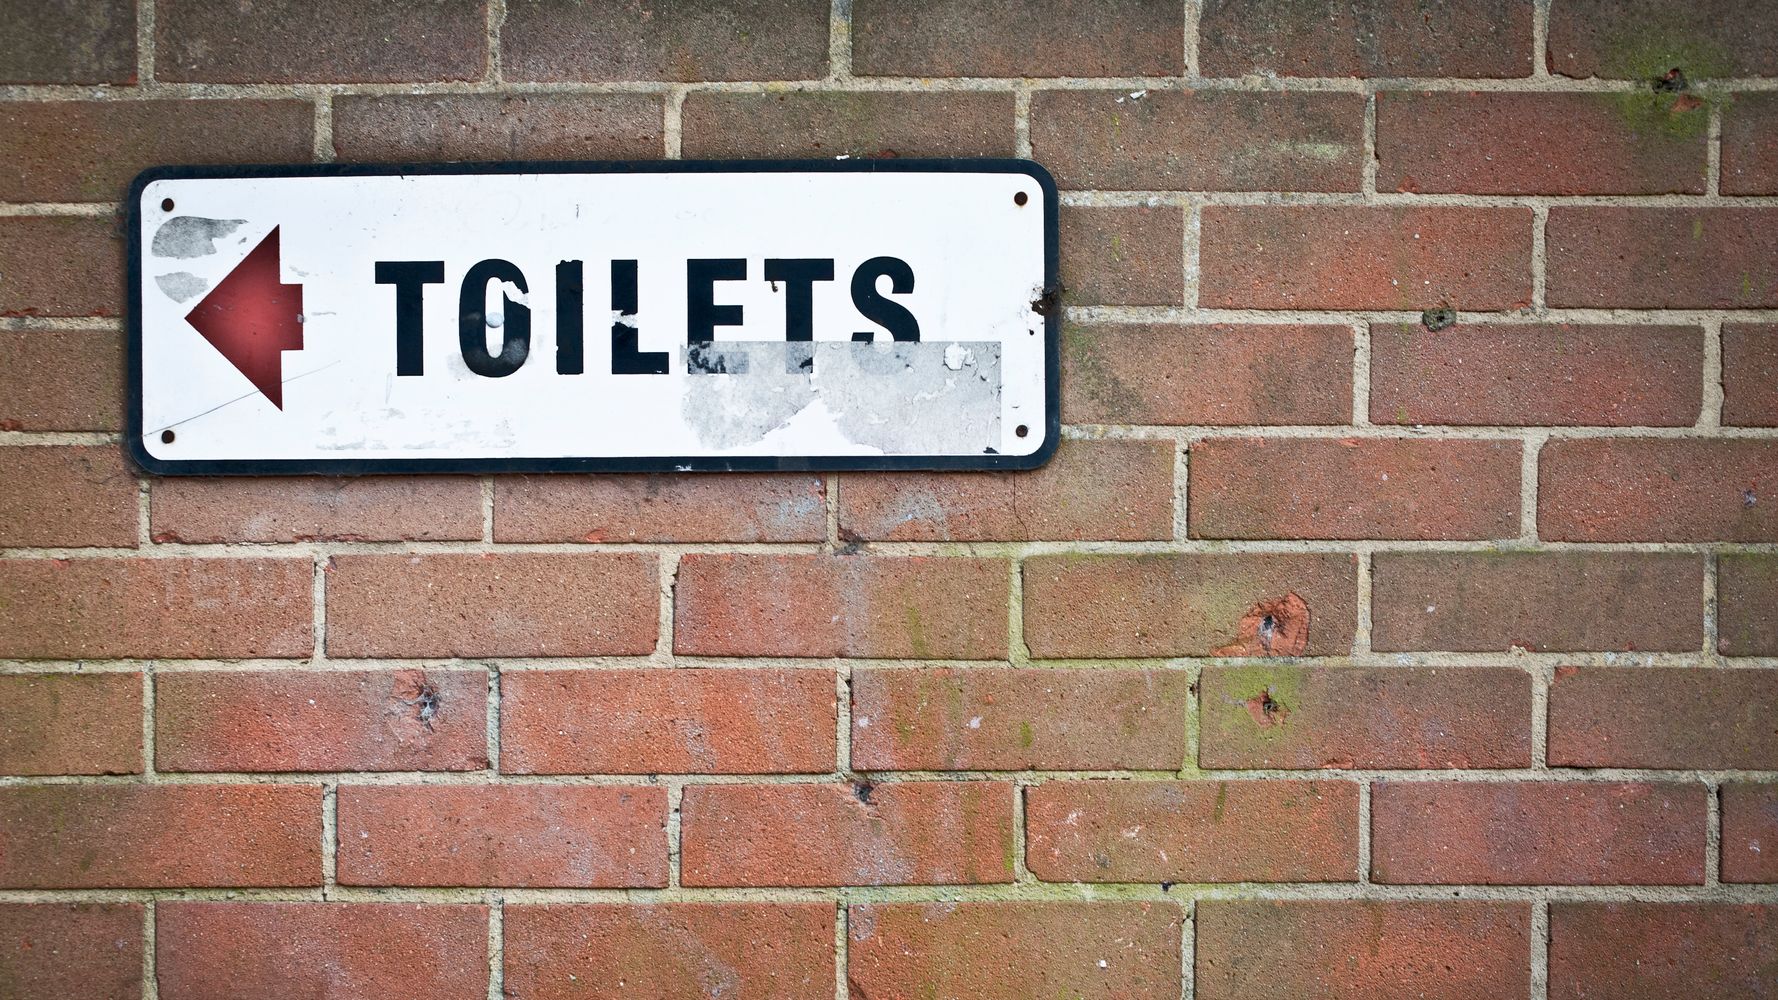 Here’s What I Want You To Know About Having Diarrhea While Out In Public